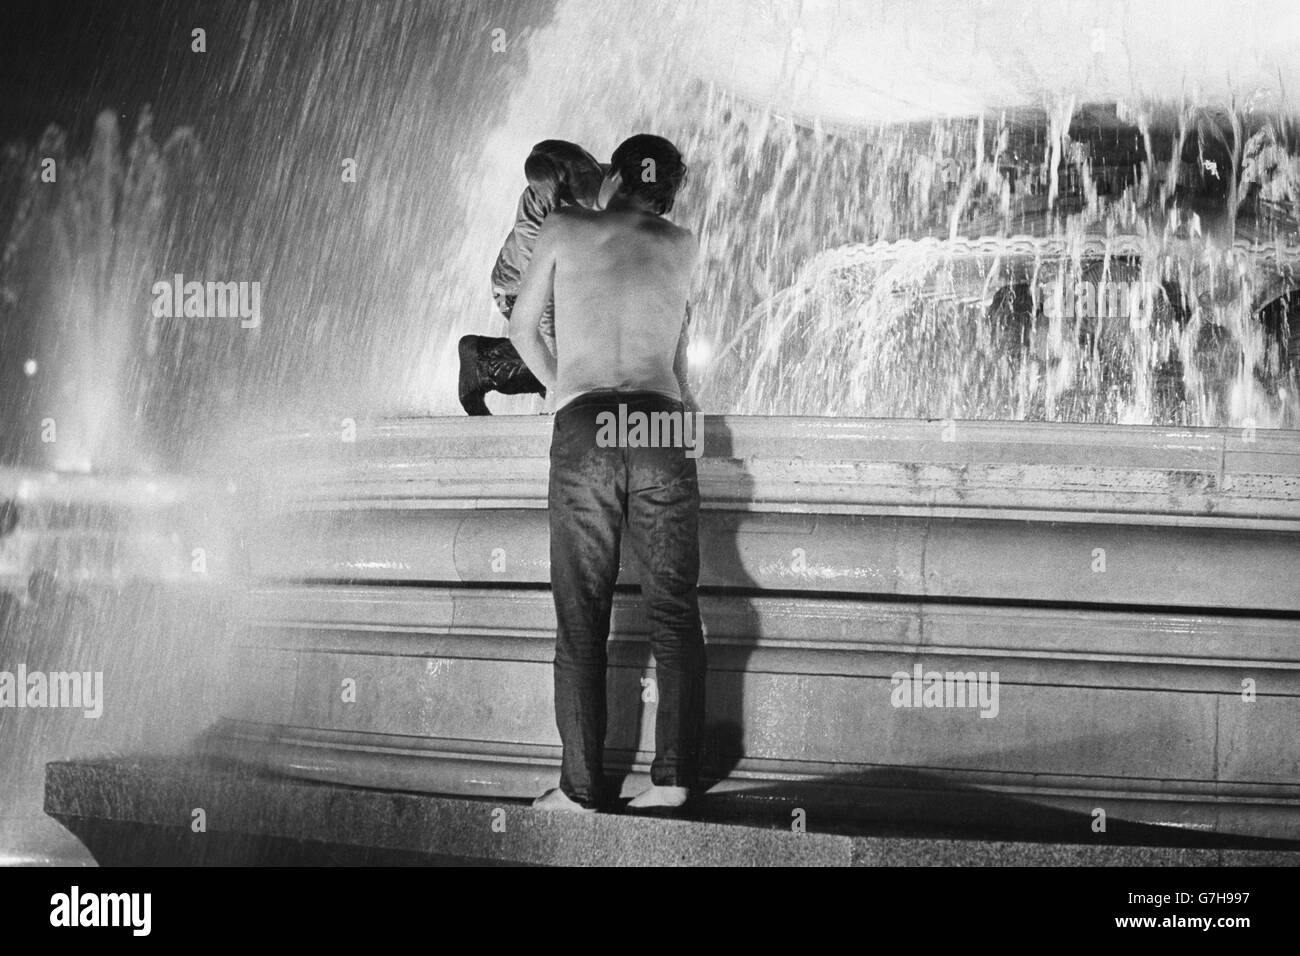 As 1968 fades away, new year antics break out in Trafalgar Square, London. two revellers, one stripped to the waist, celebrate the new year with a kiss. Stock Photo